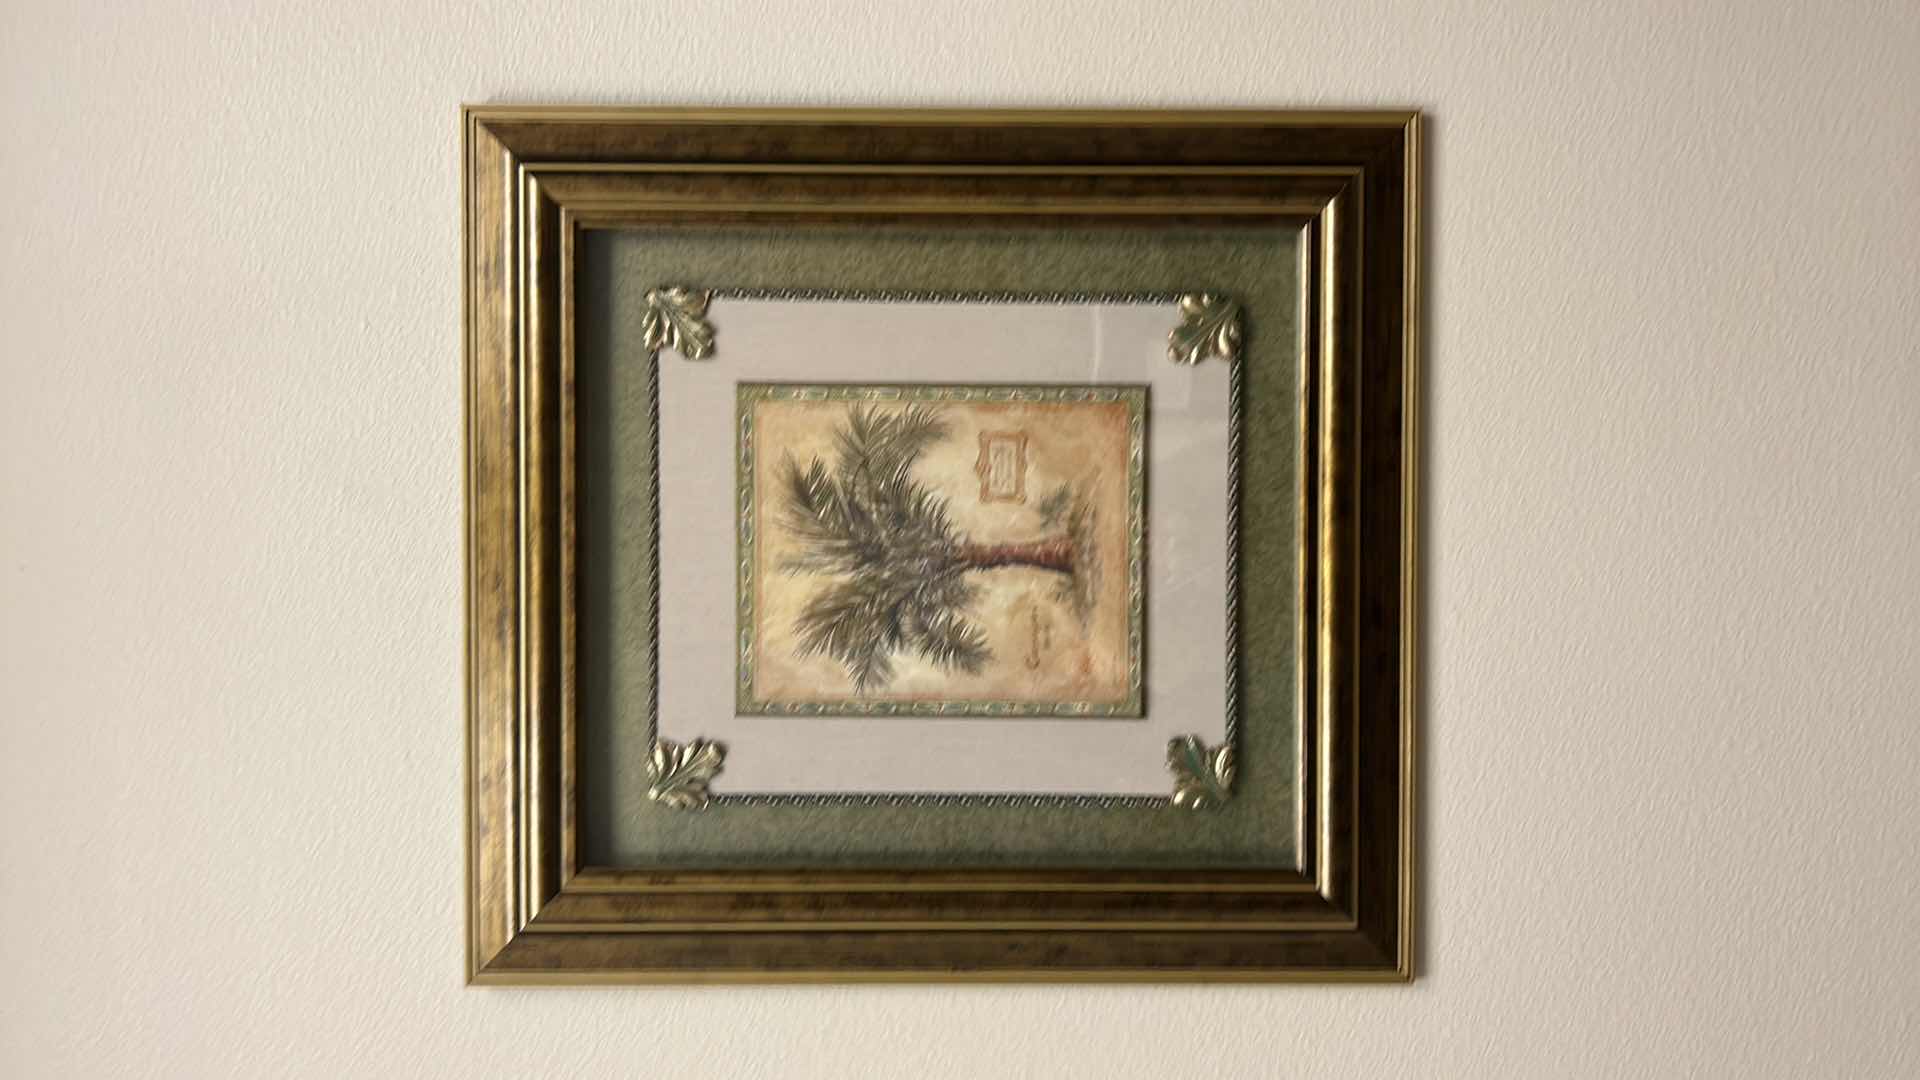 Photo 6 of GOLD TONED FRAMED DIMENSIONAL SHADOW BOX "PALM TREE" ARTWORK 23” x 25”